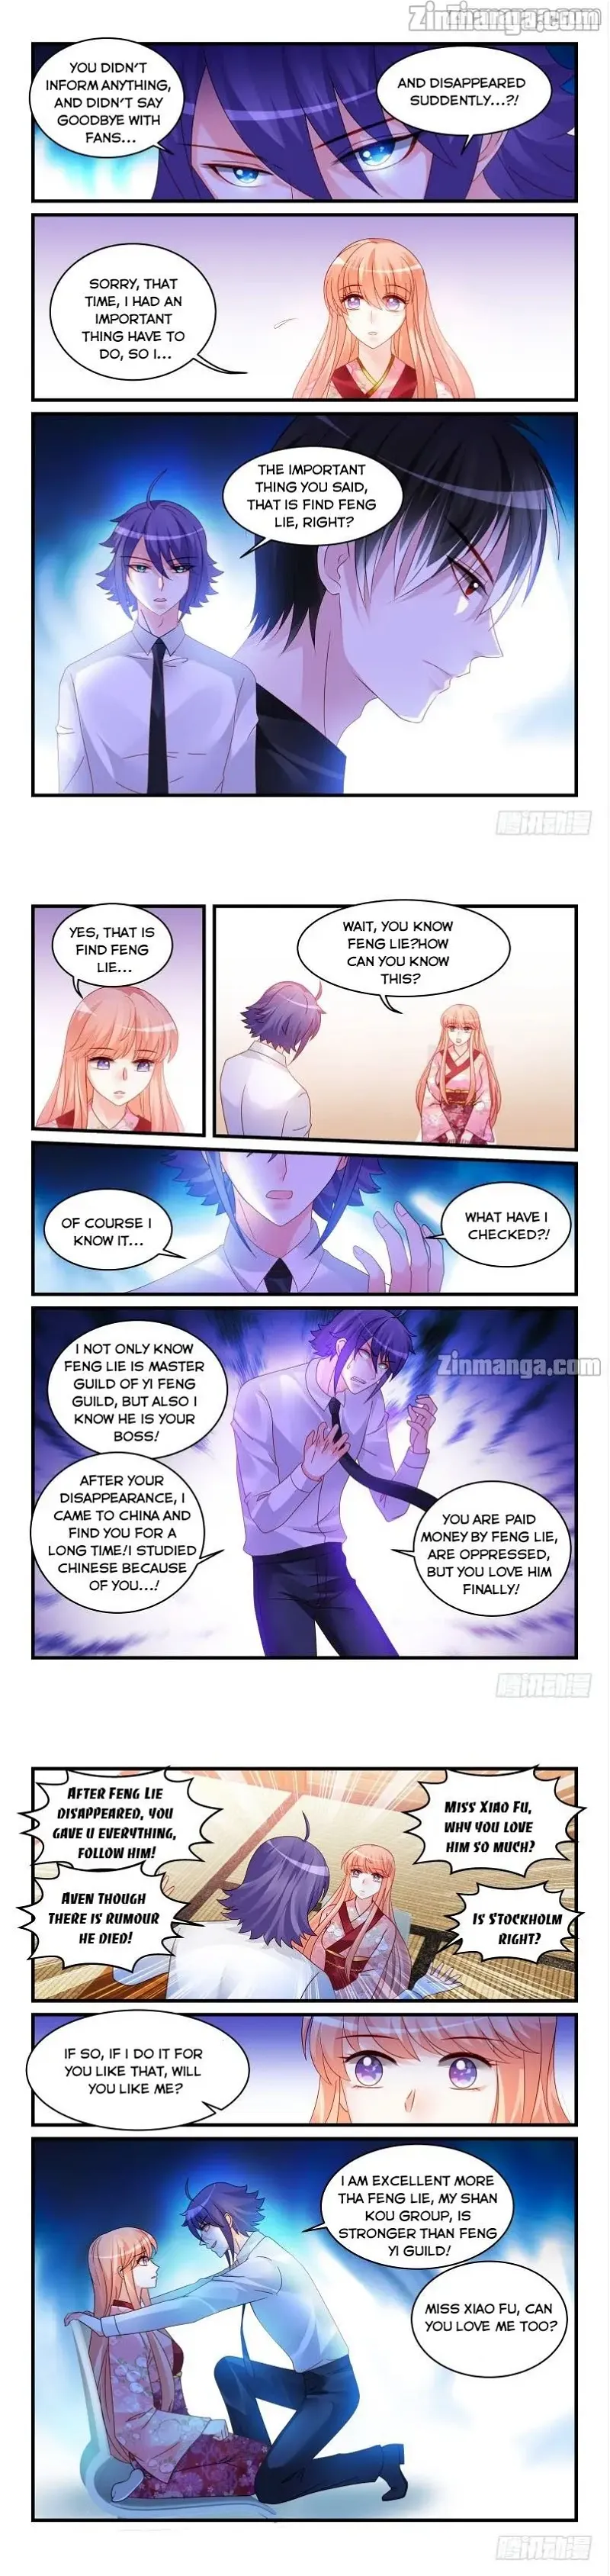 Teach the devil husband Chapter 235 page 4